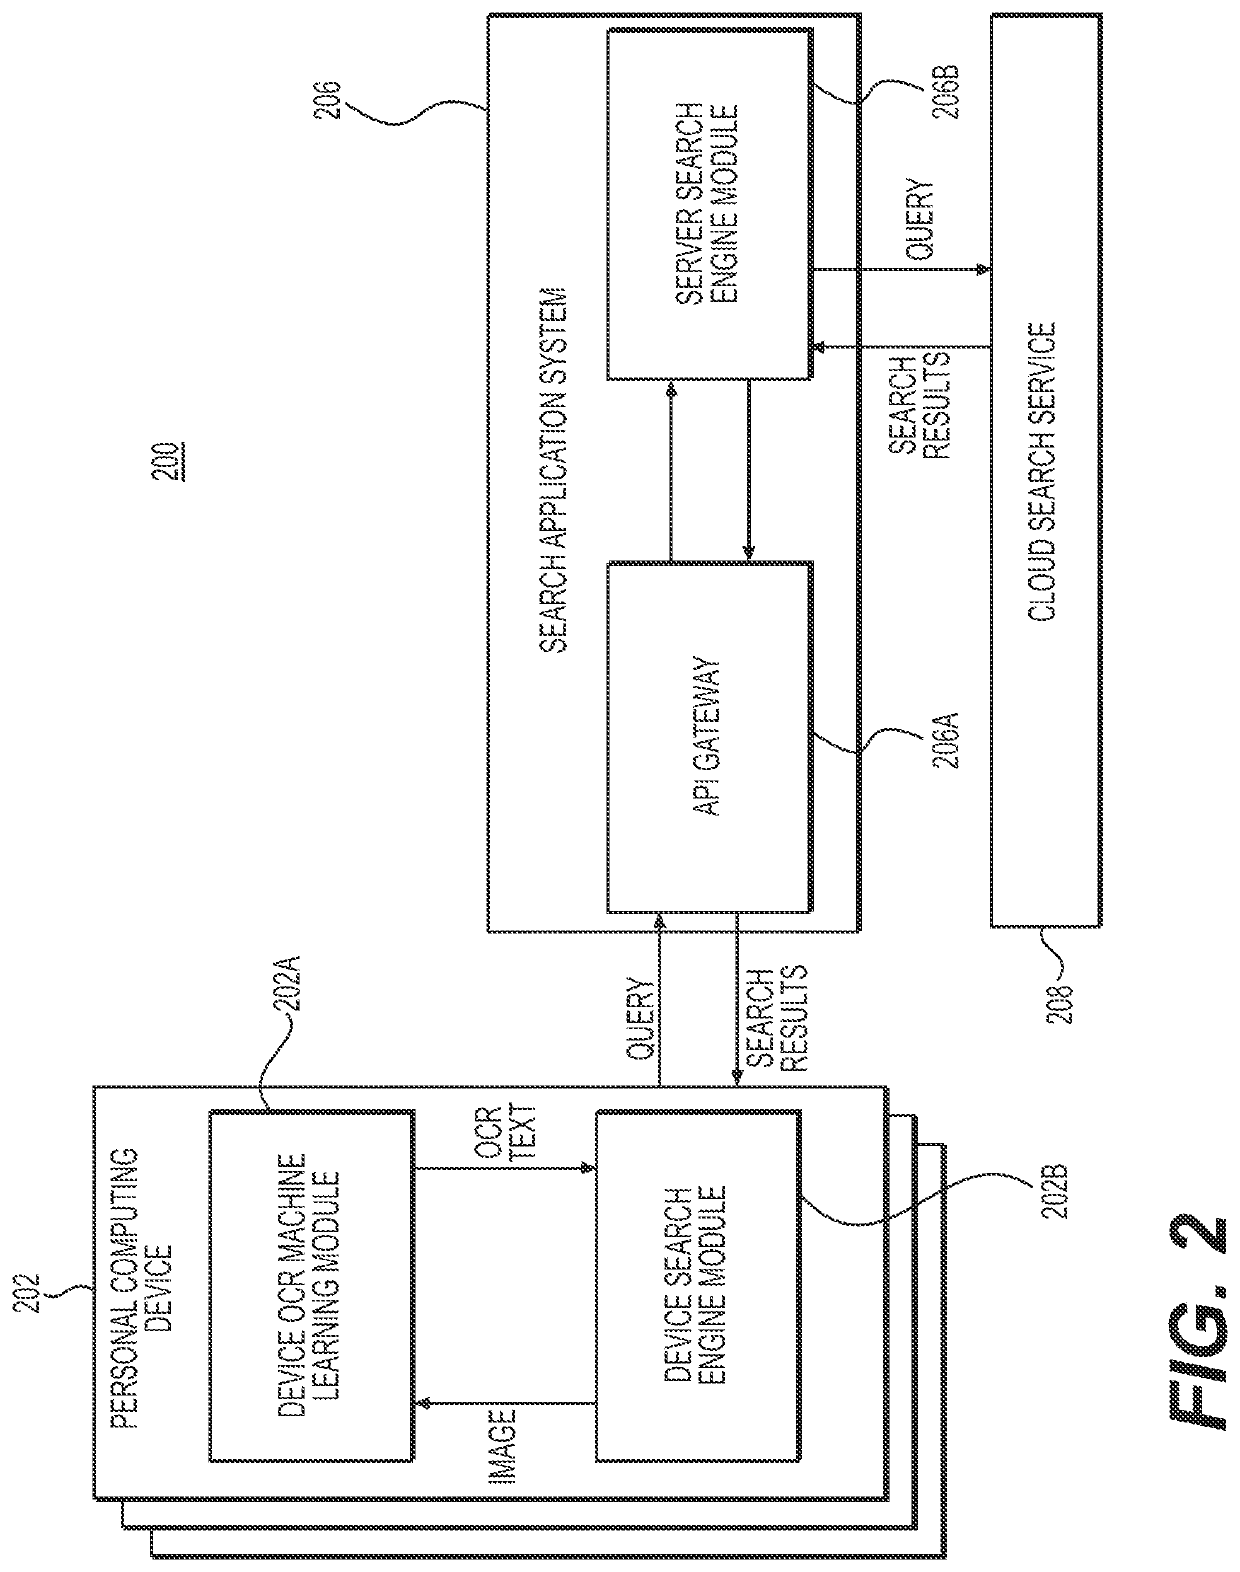 Systems and methods for generating search results based on optical character recognition techniques and machine-encoded text